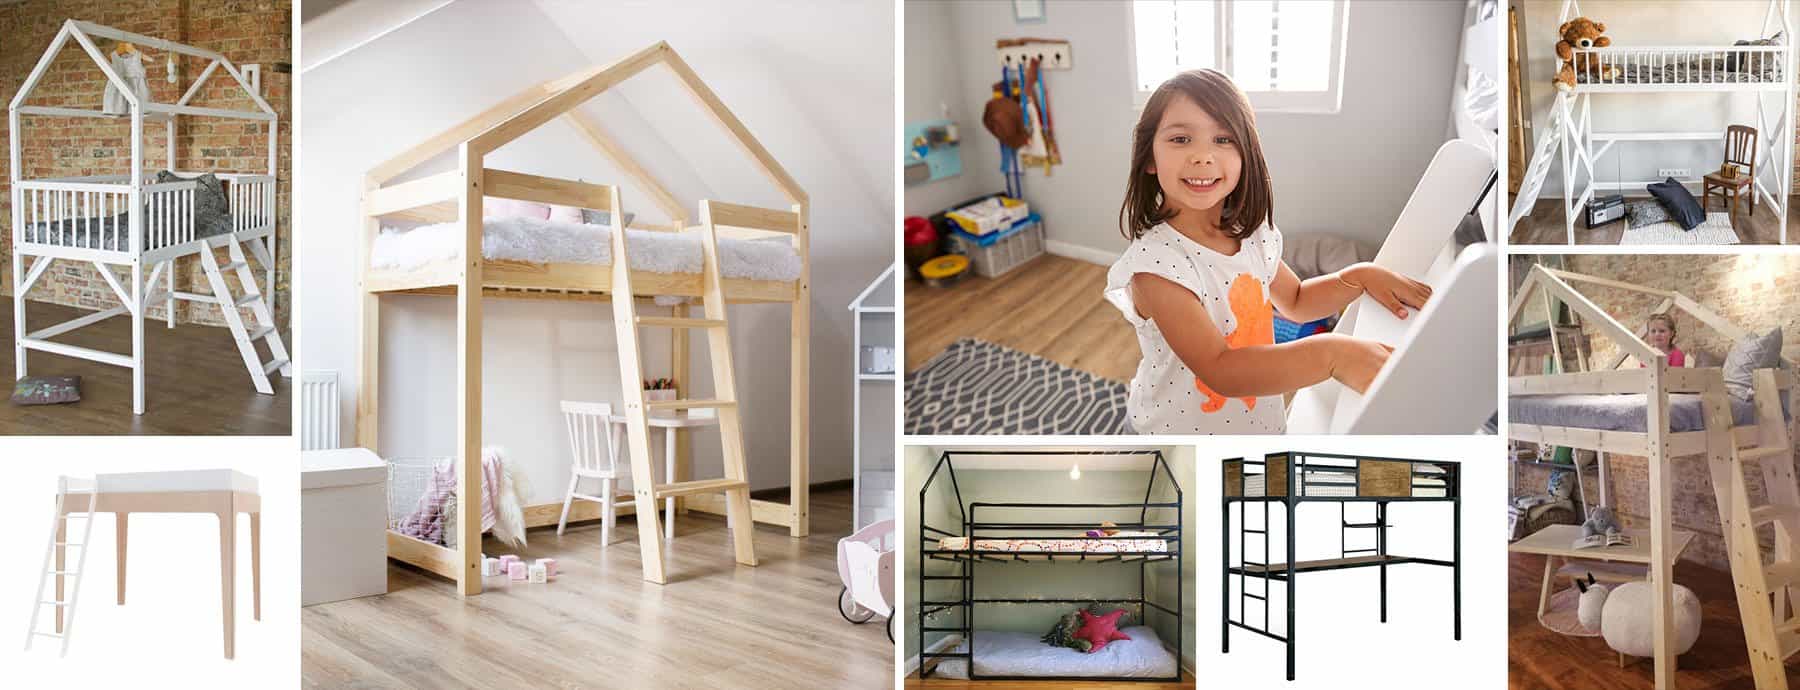 where to buy loft beds